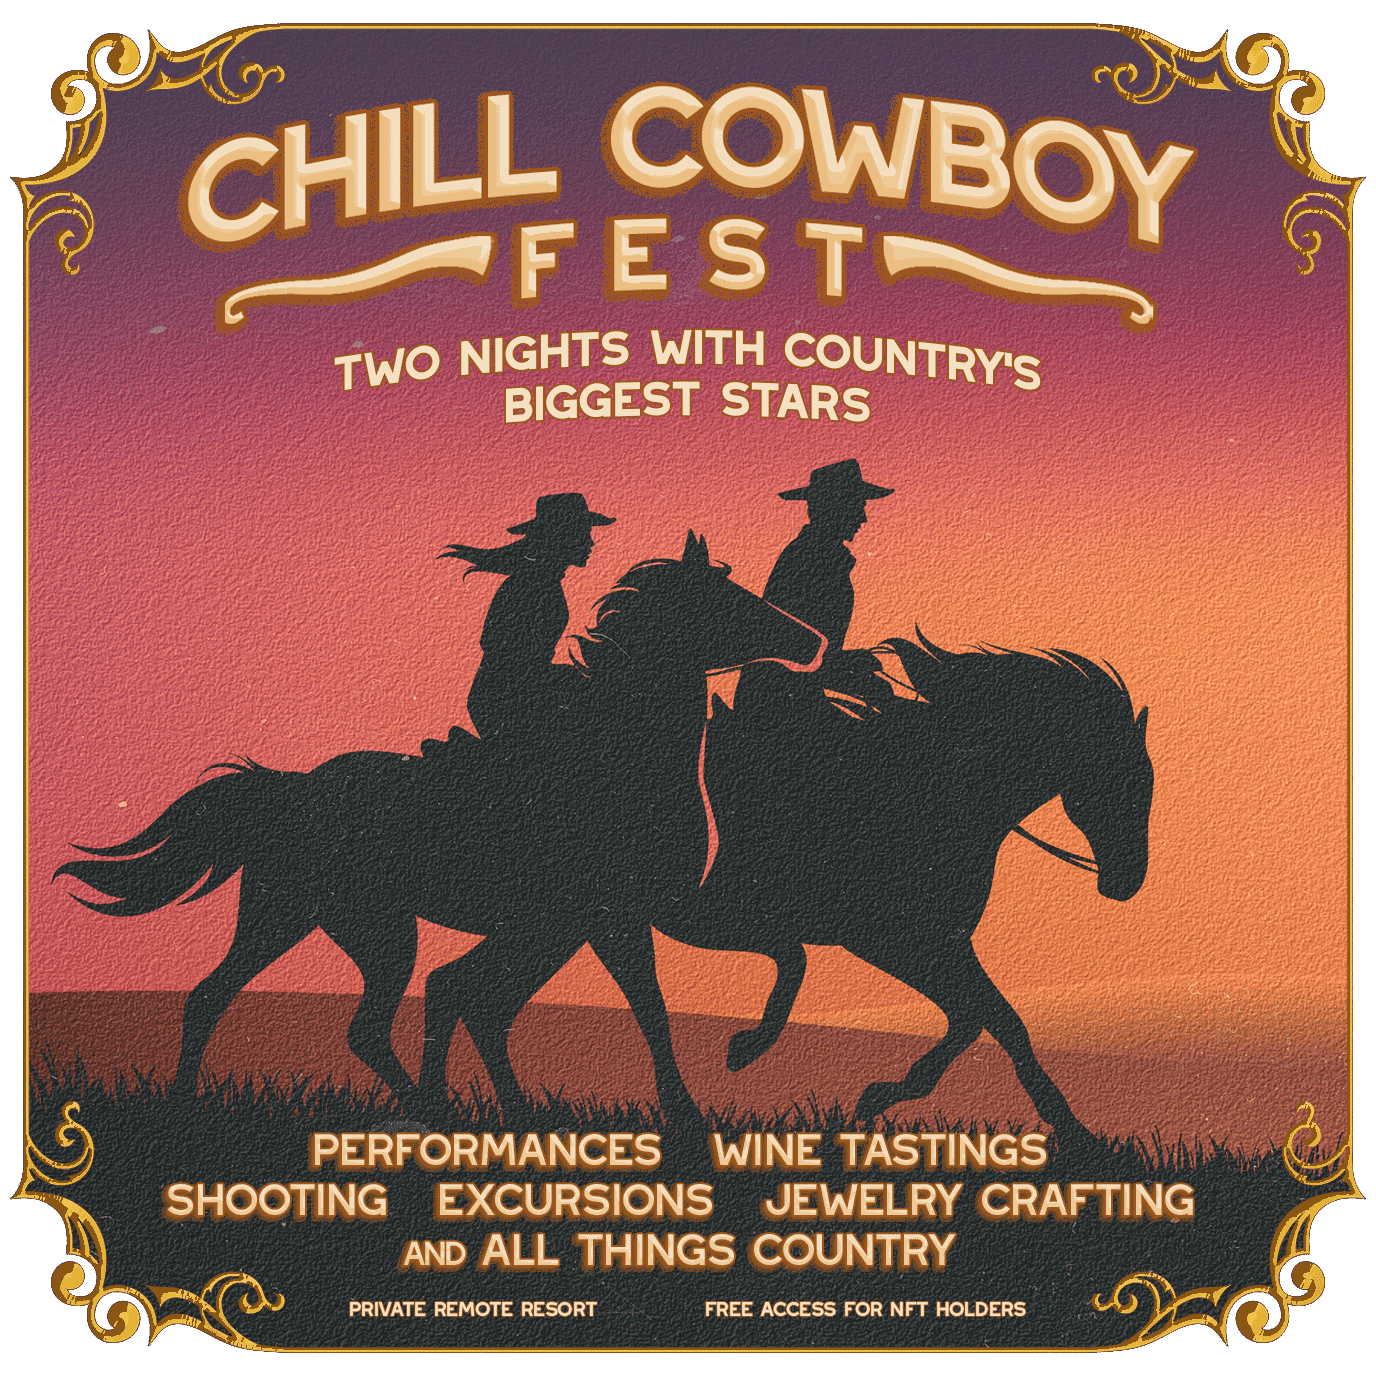 digital poster of the Chill Cowboy Fest NFT event created by Bryan Kelley and Brittney Kelley